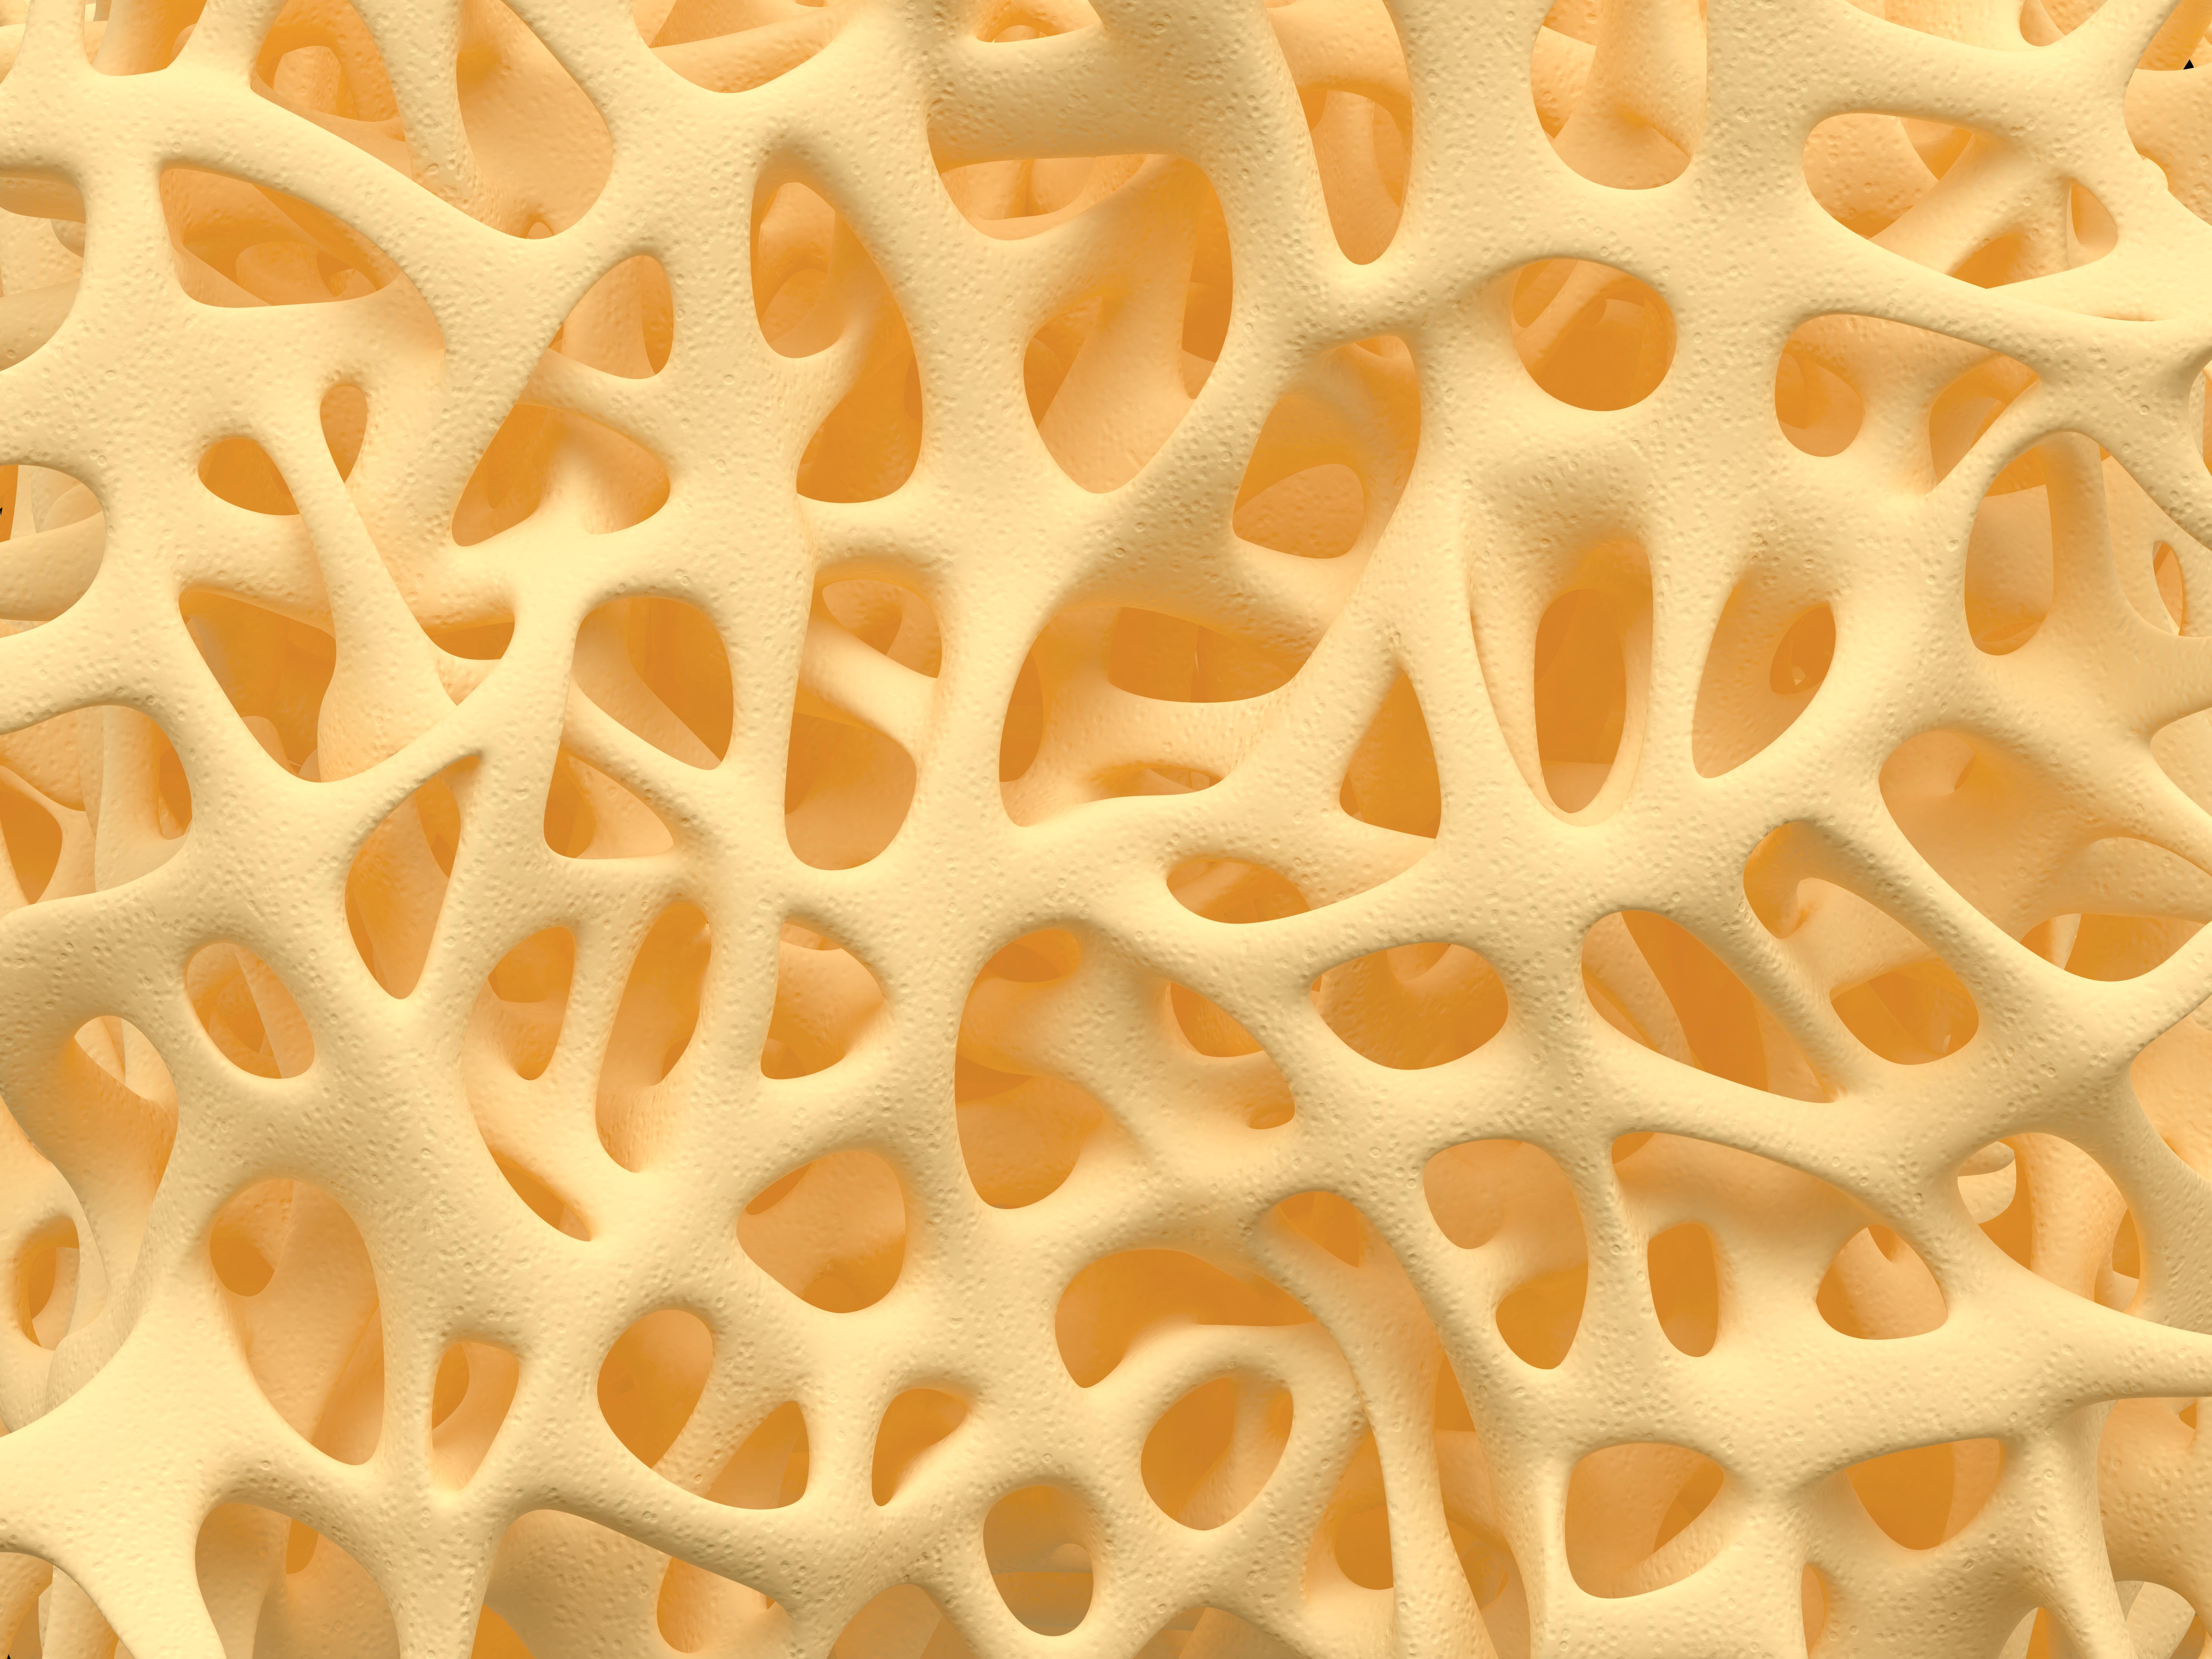 ACP Updates Osteoporosis Guidance, Makes Strong Endorsement for Bisphosphonates